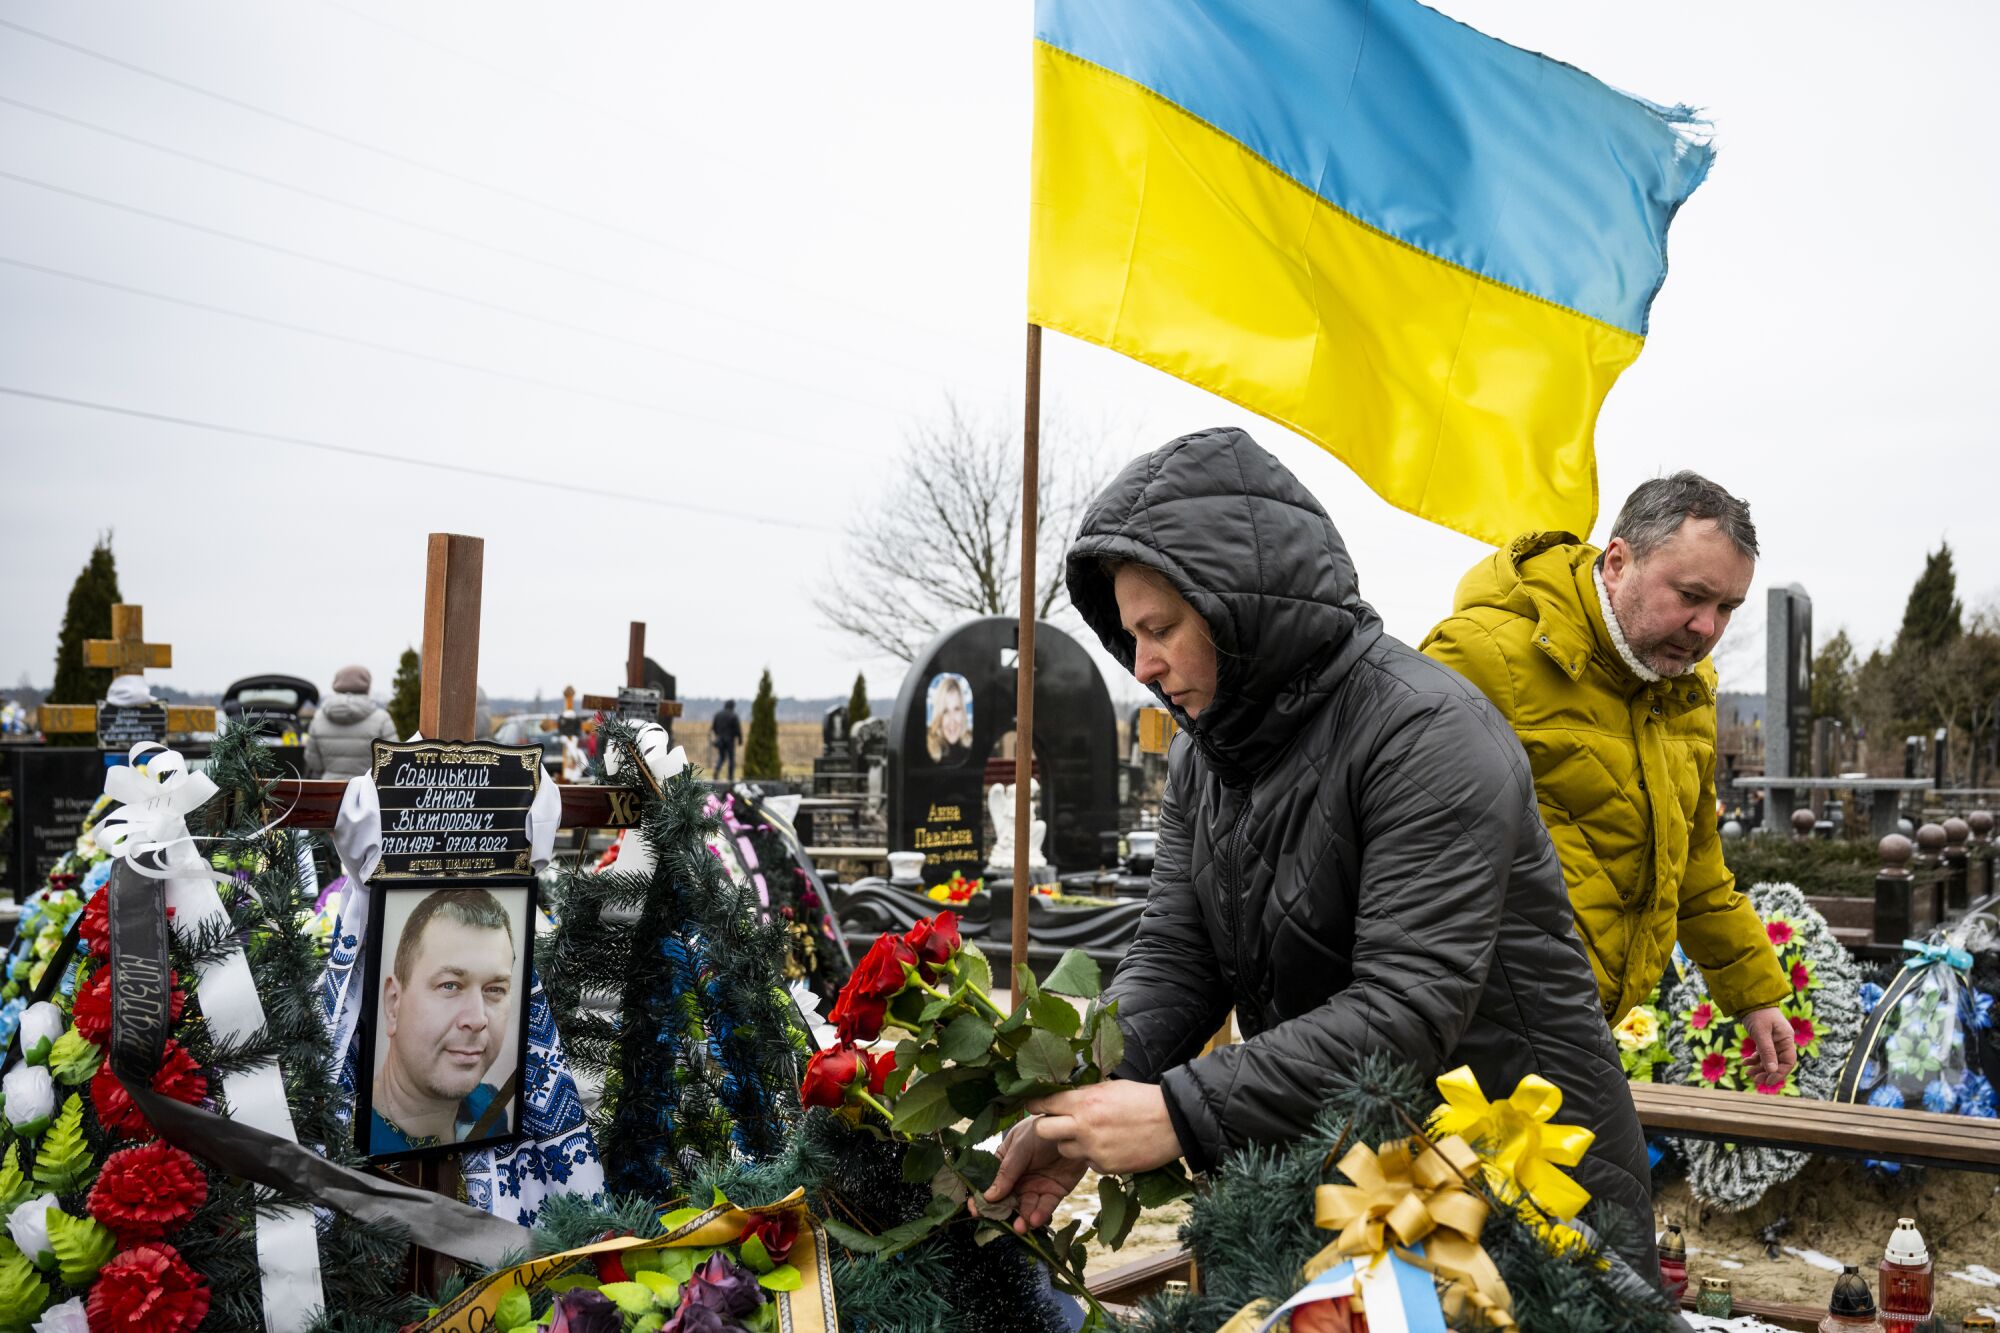 Mourners in raincoats visit a grave adorned with flowers and the Ukrainian flag